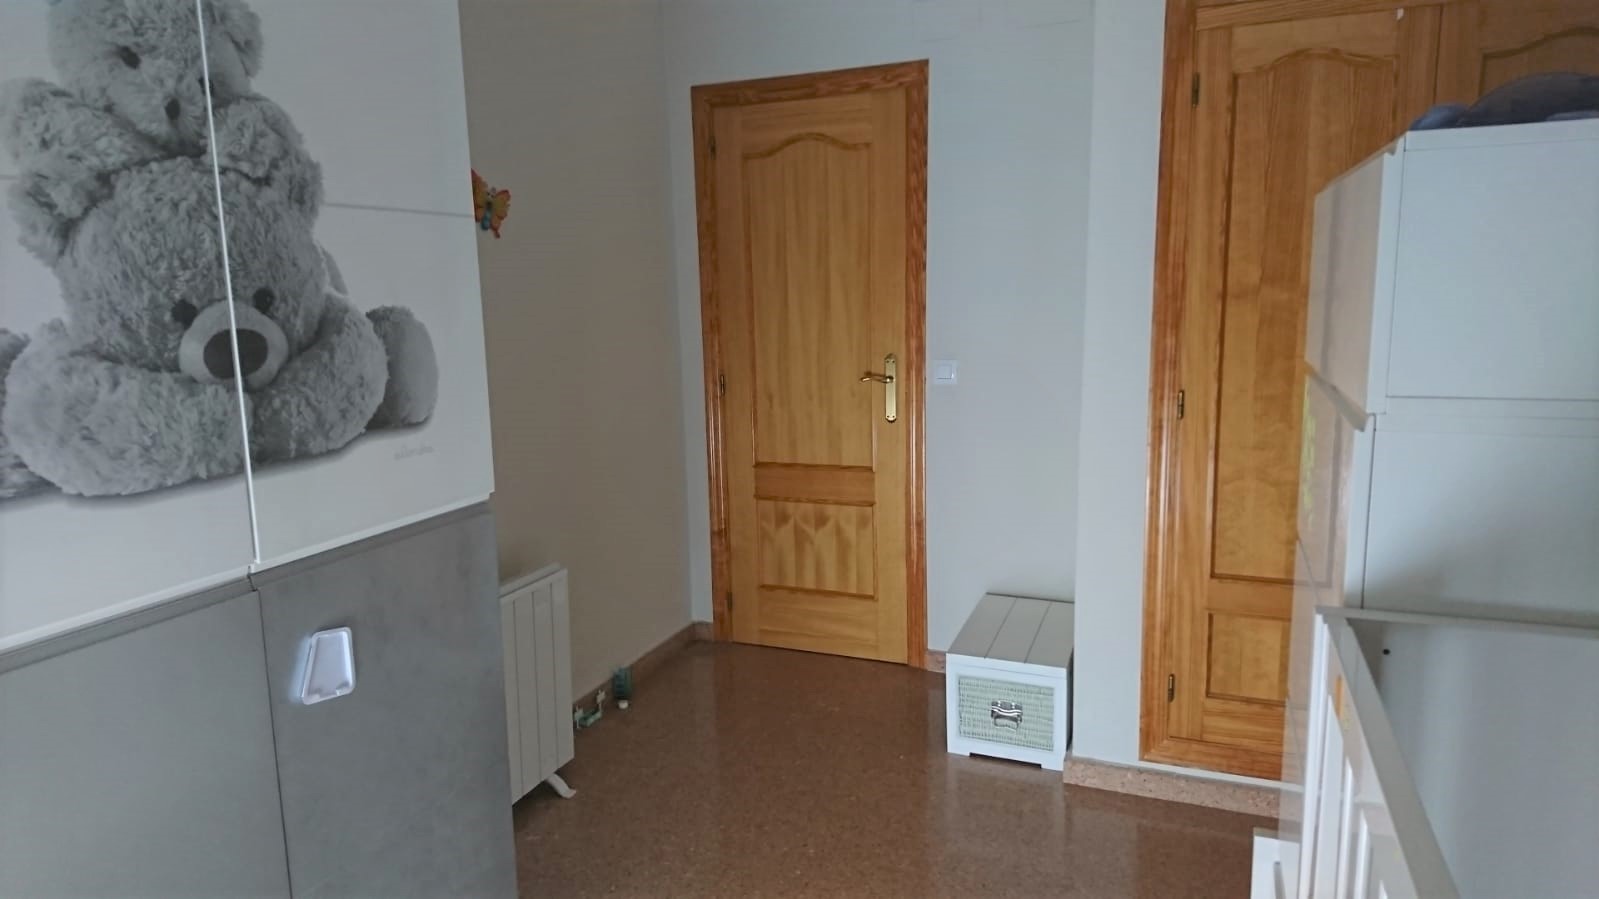 Large 3-bedroom apartment in the centre of Benidoleig.